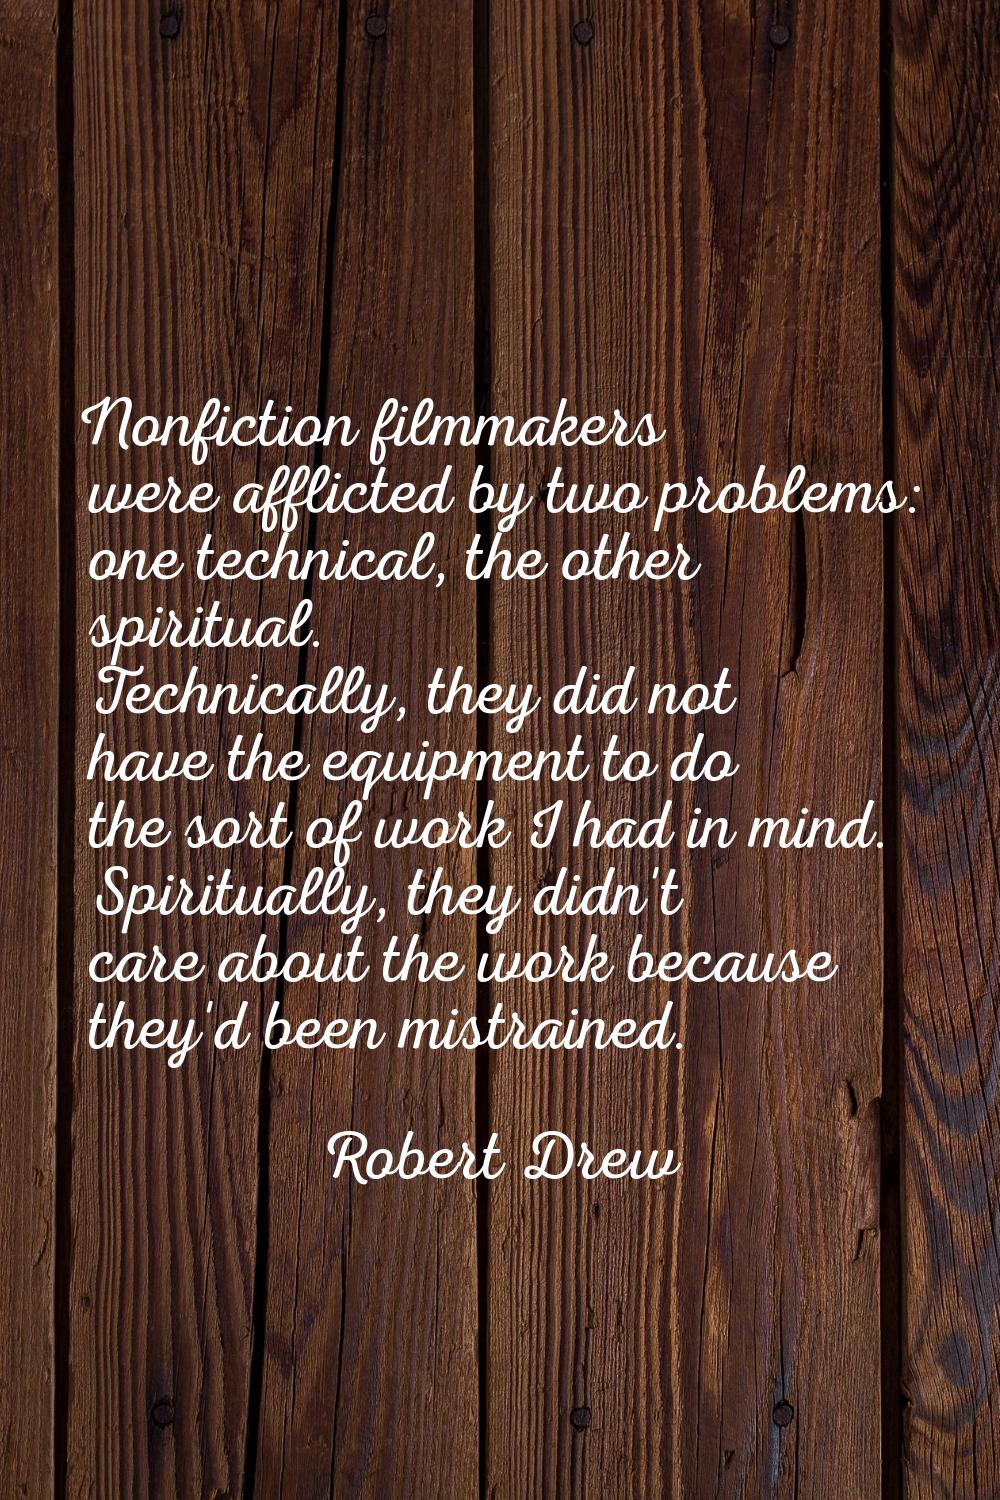 Nonfiction filmmakers were afflicted by two problems: one technical, the other spiritual. Technical